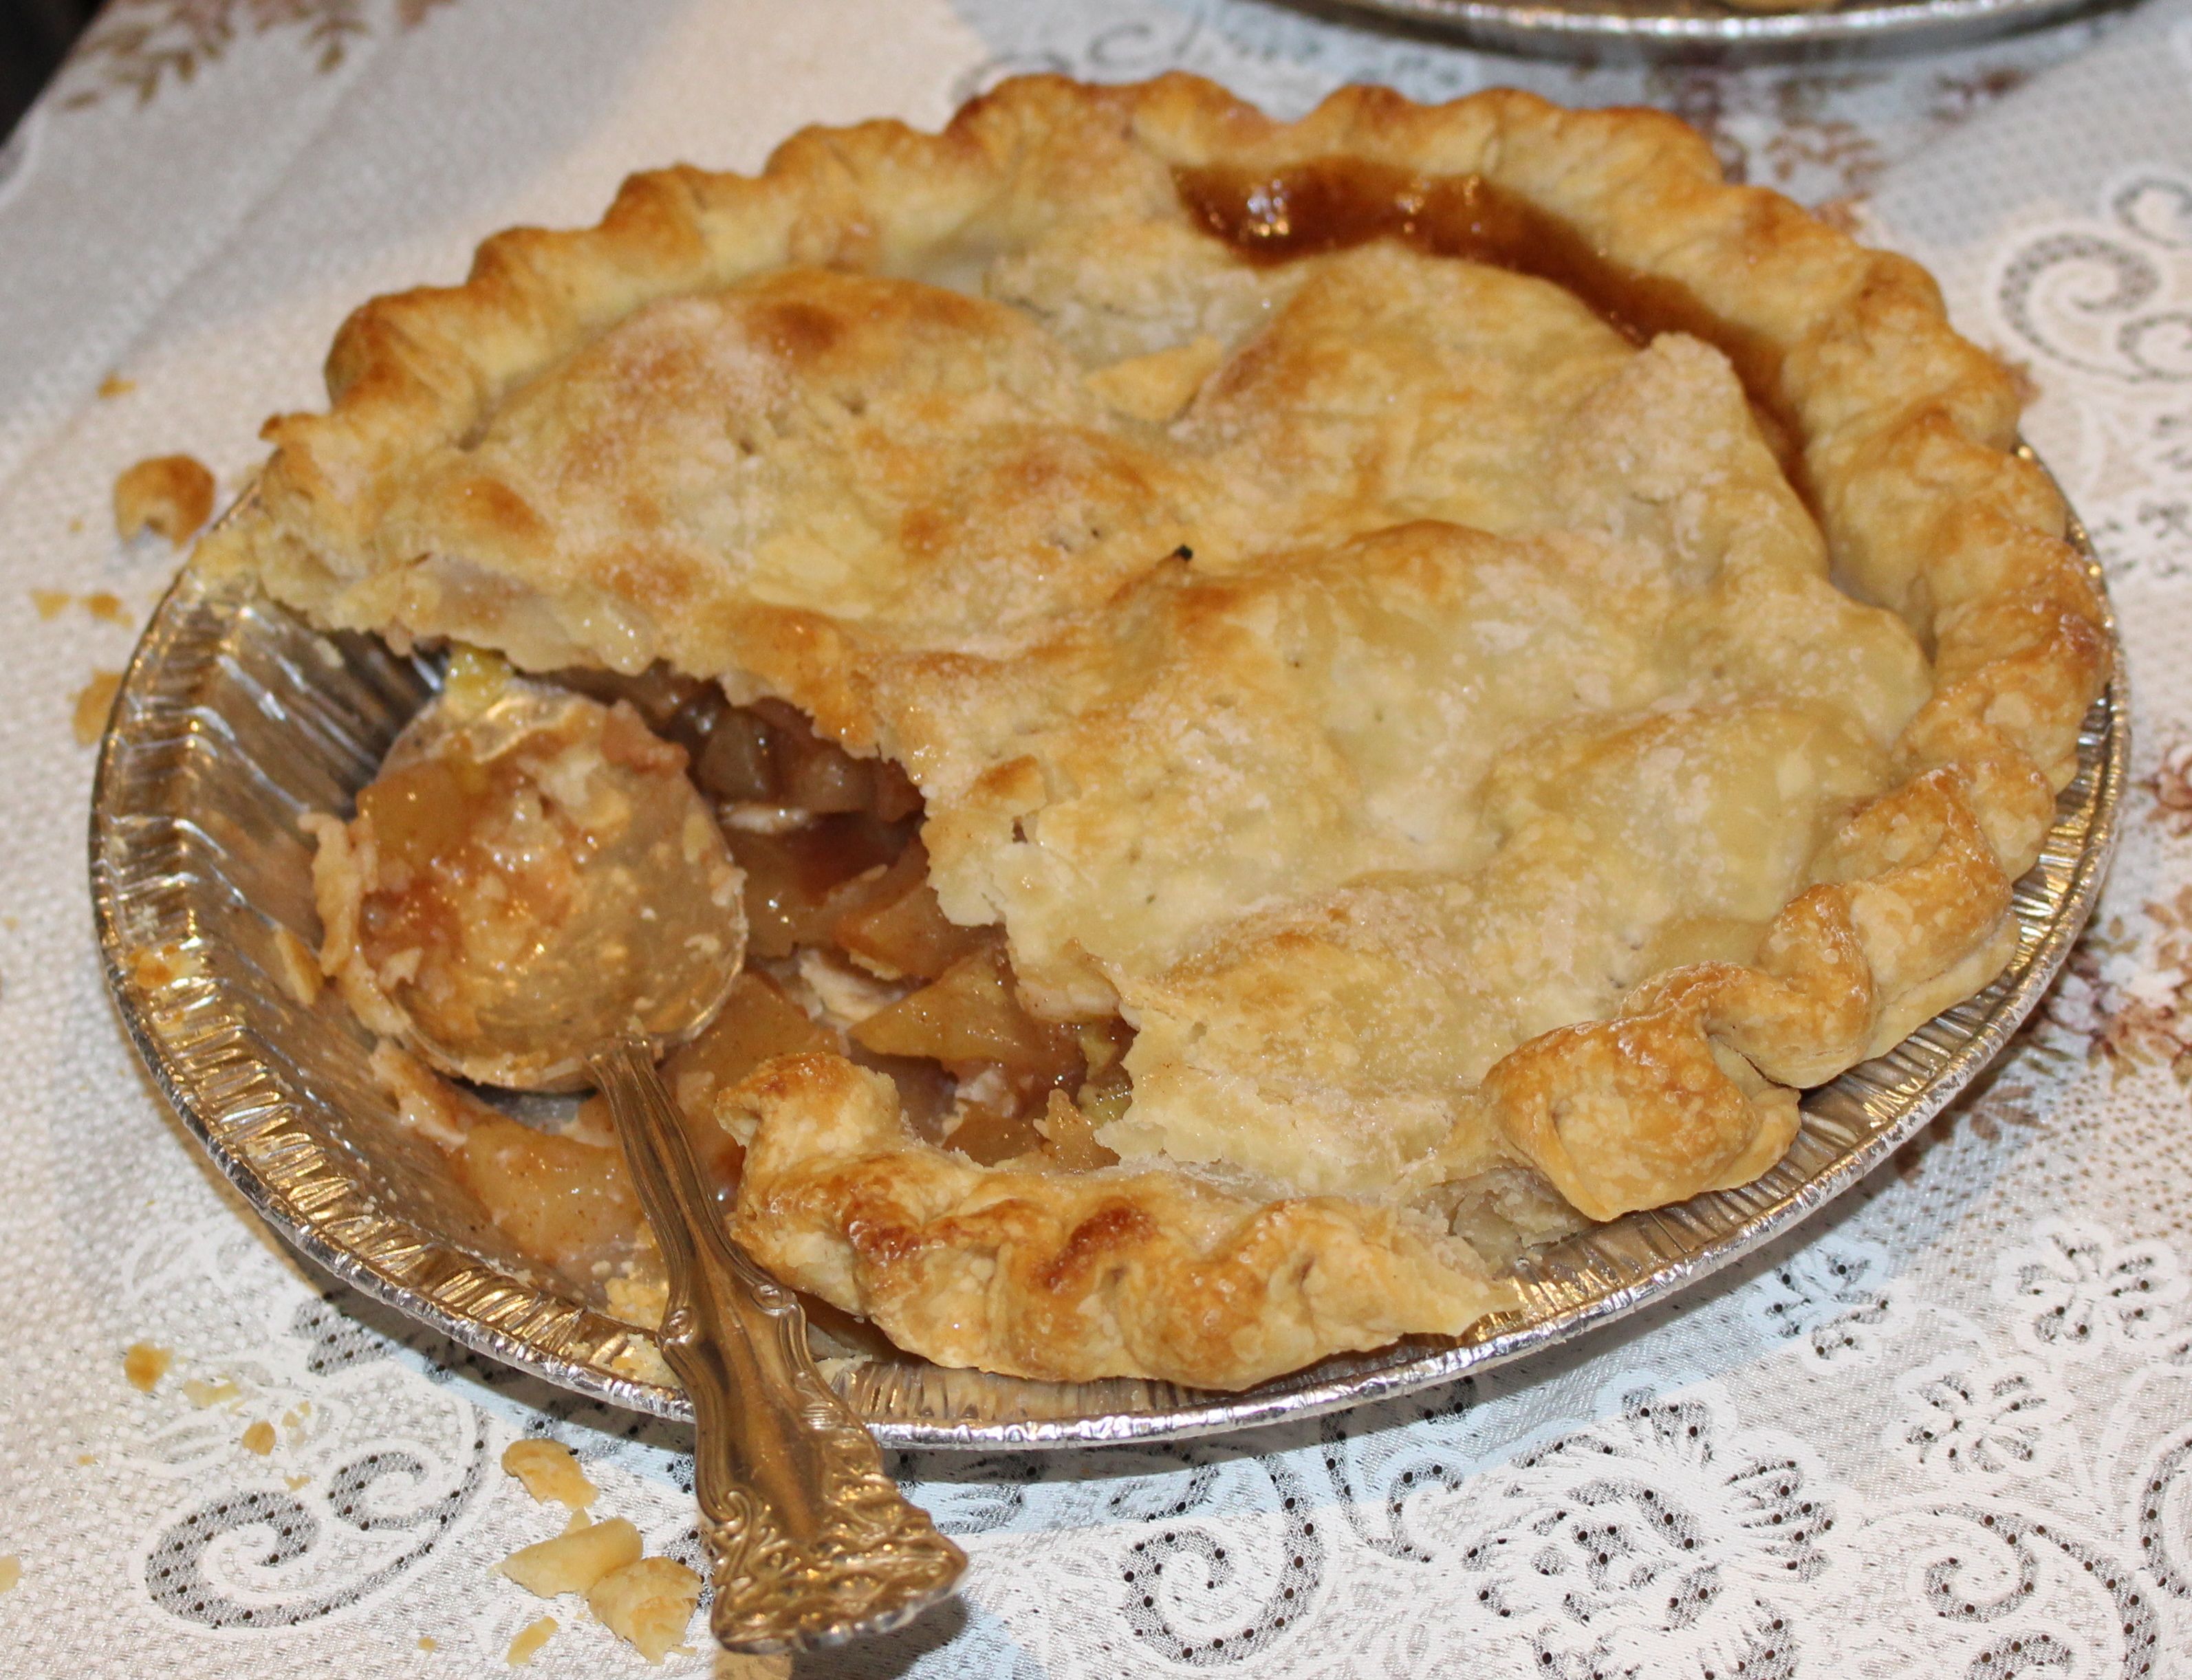 Apple Pie Time New England Apples